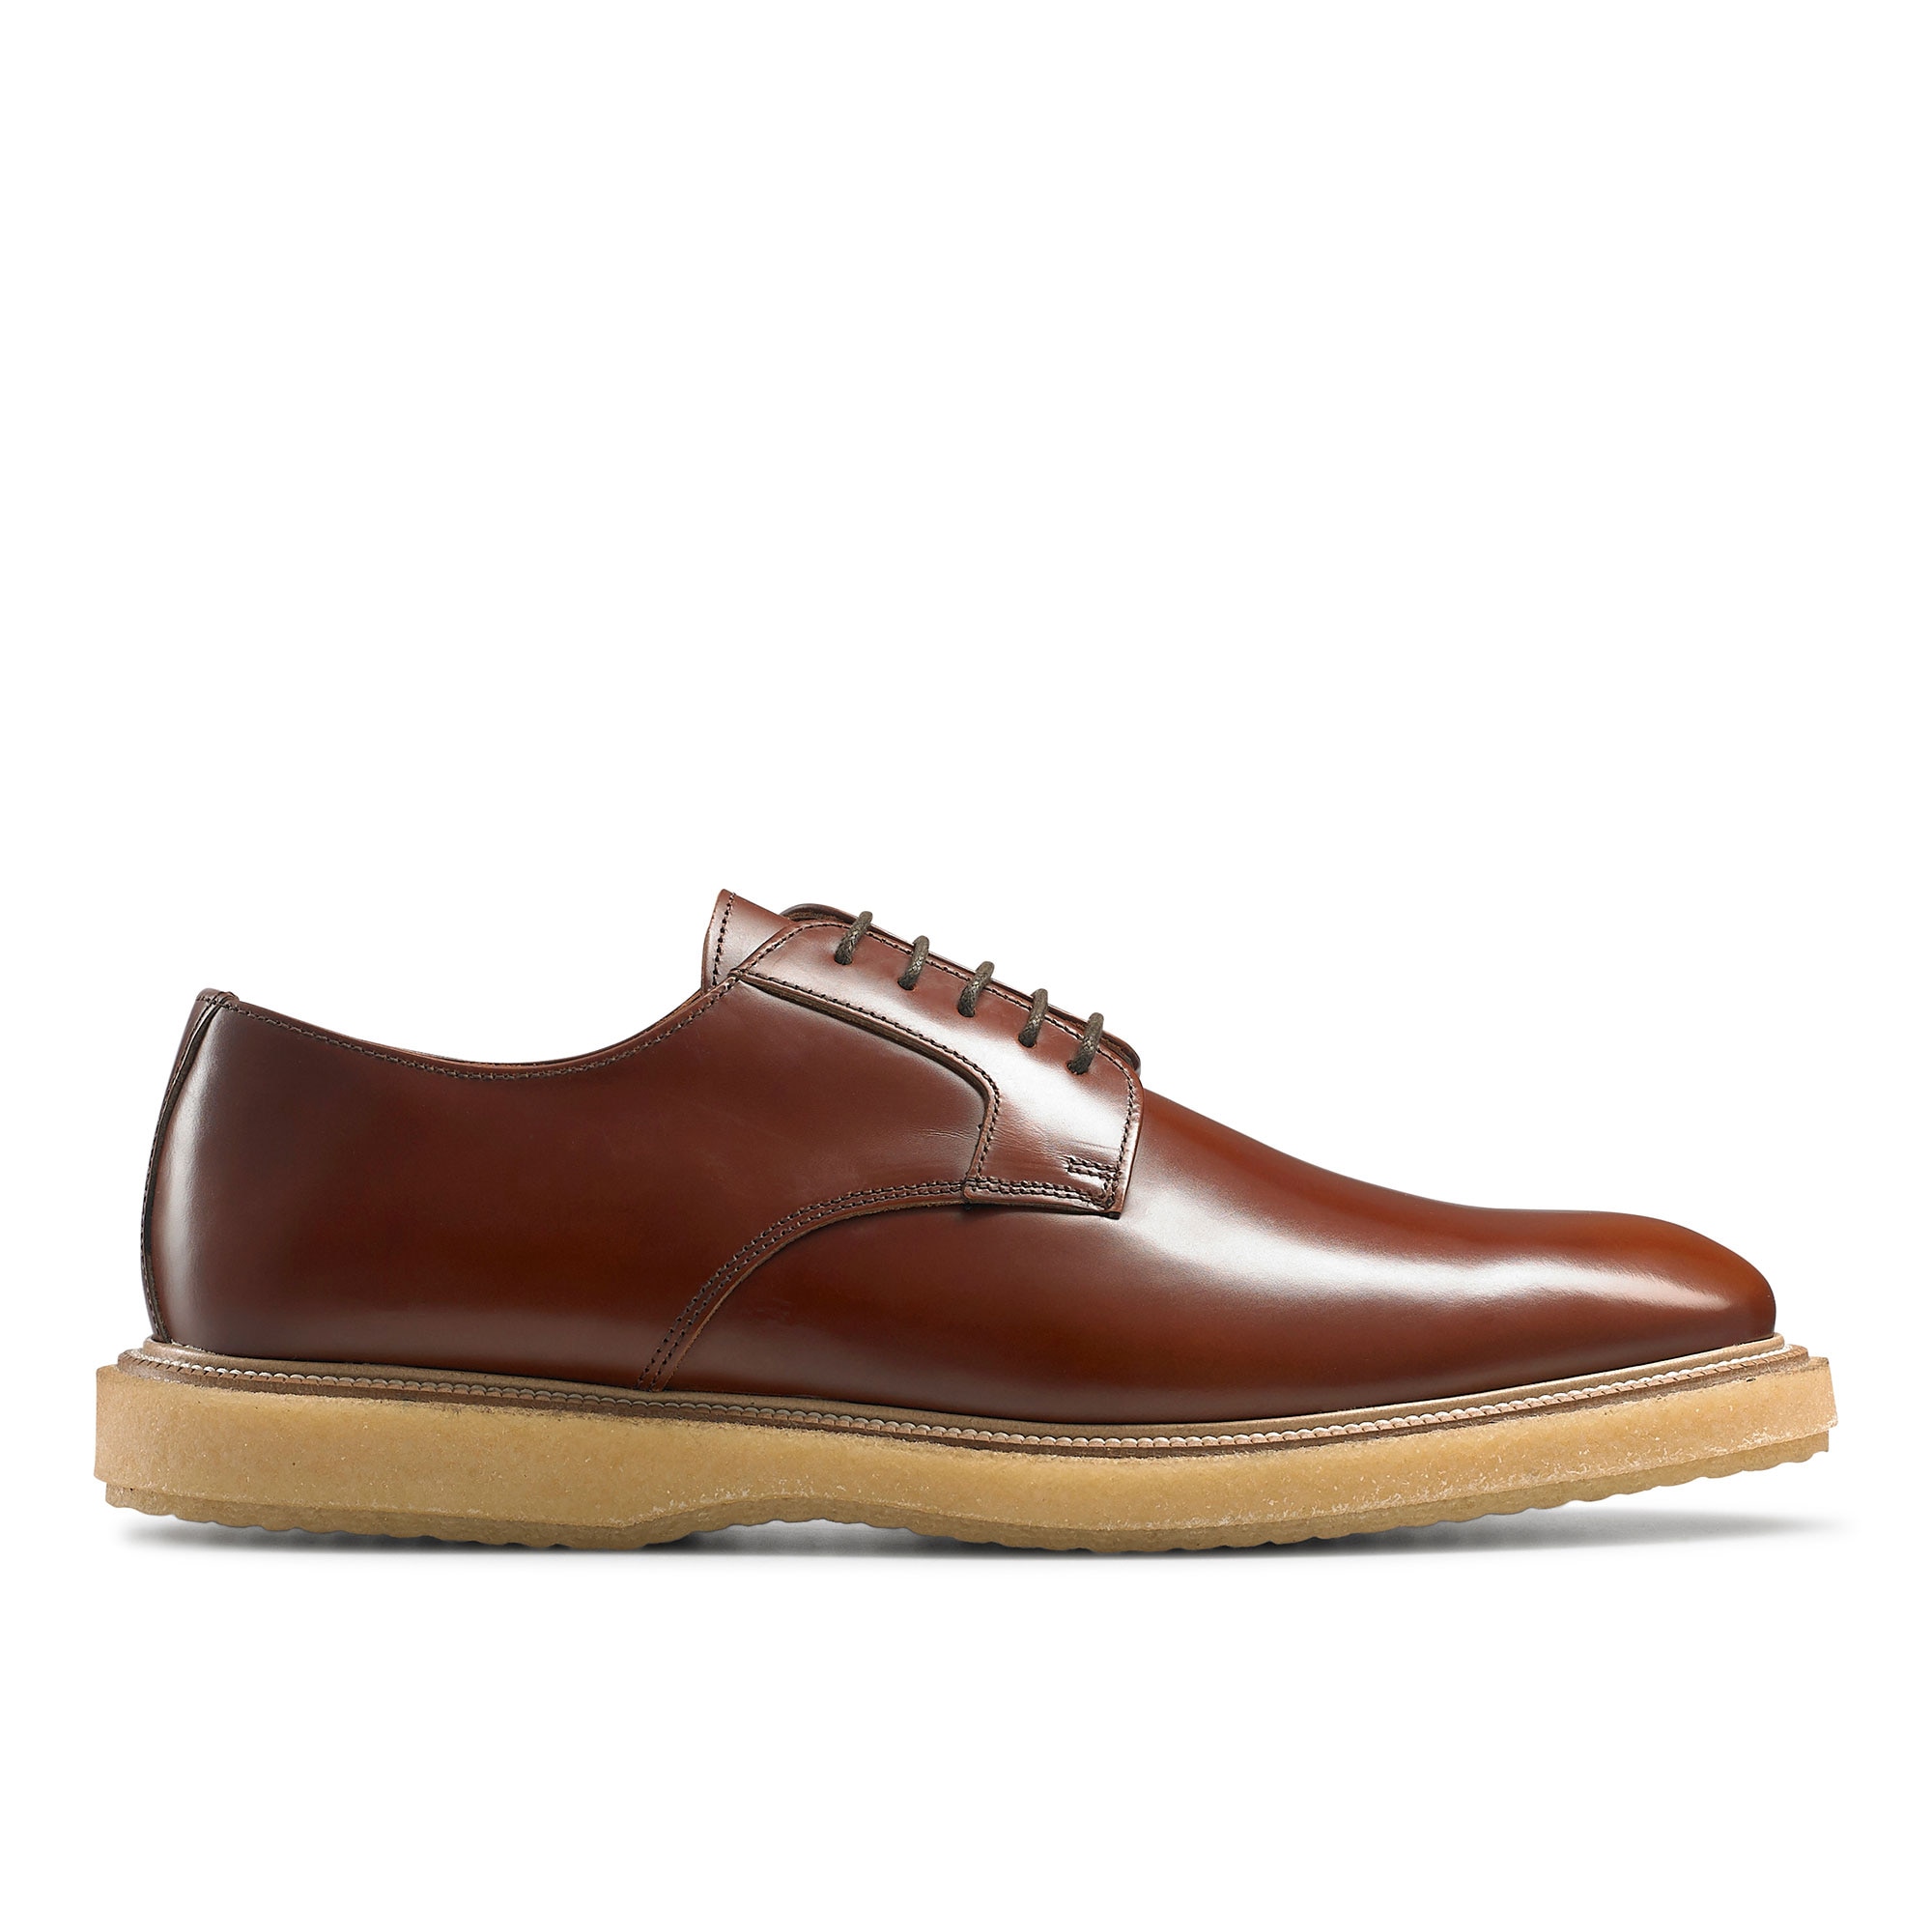 Russell and Bromley Oporto mens shoes in brown